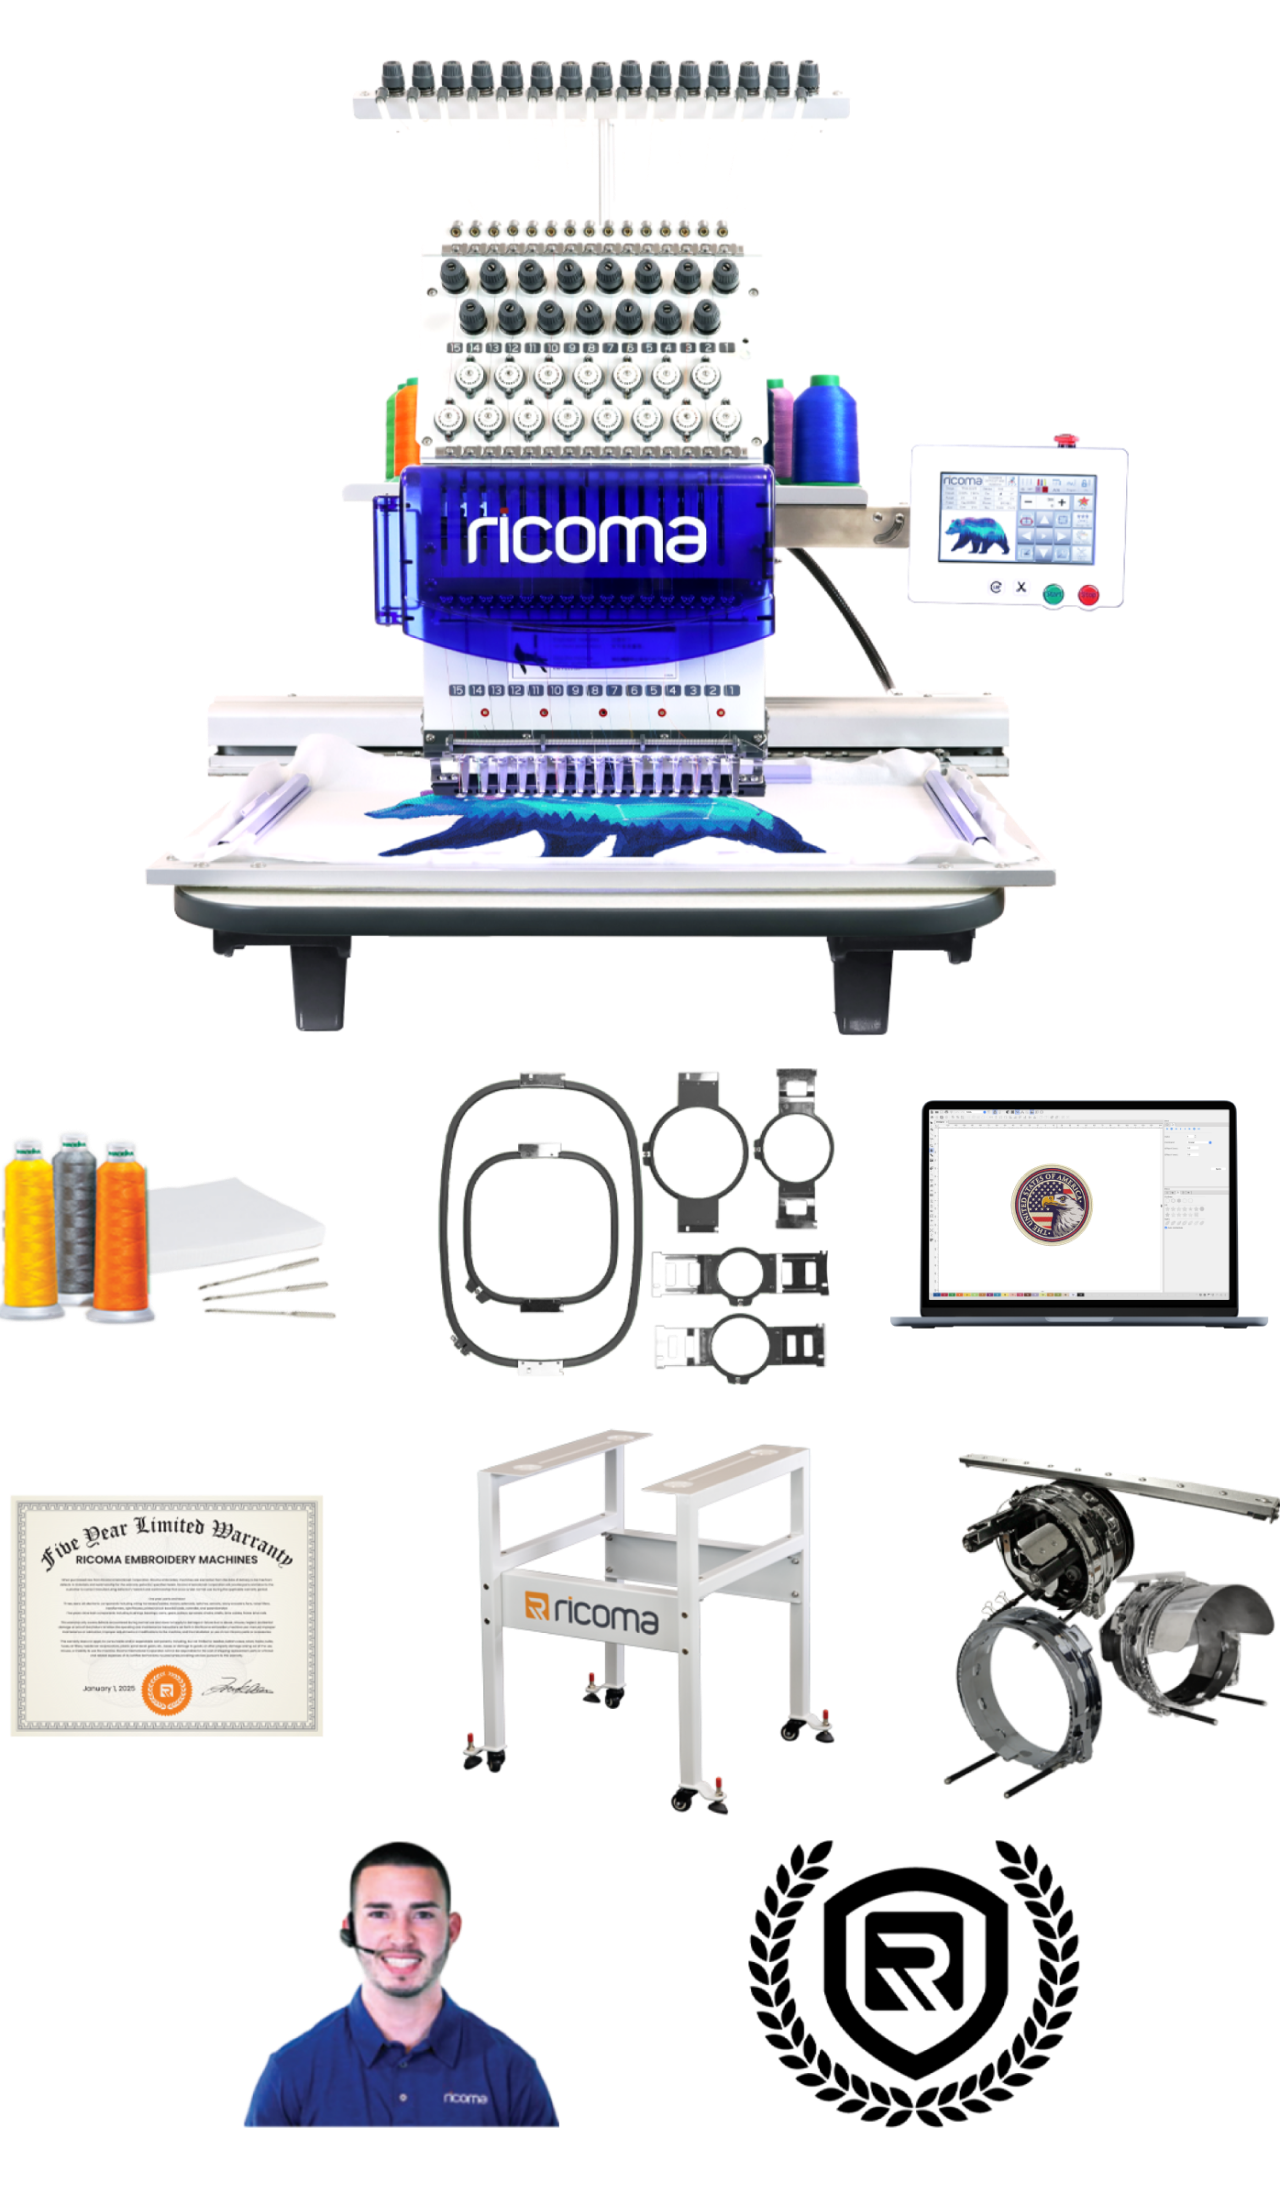 Embroidery machine<br/>(Choose from any of our models),Heavy-duty steel stand,Multiple hoops,Cap driver assembly with cap rings,Embroidery starter kit,Chroma Inspire digitizing software,Free training,Ricoma limited 5-year warranty,UNLIMITED lifetime technical support